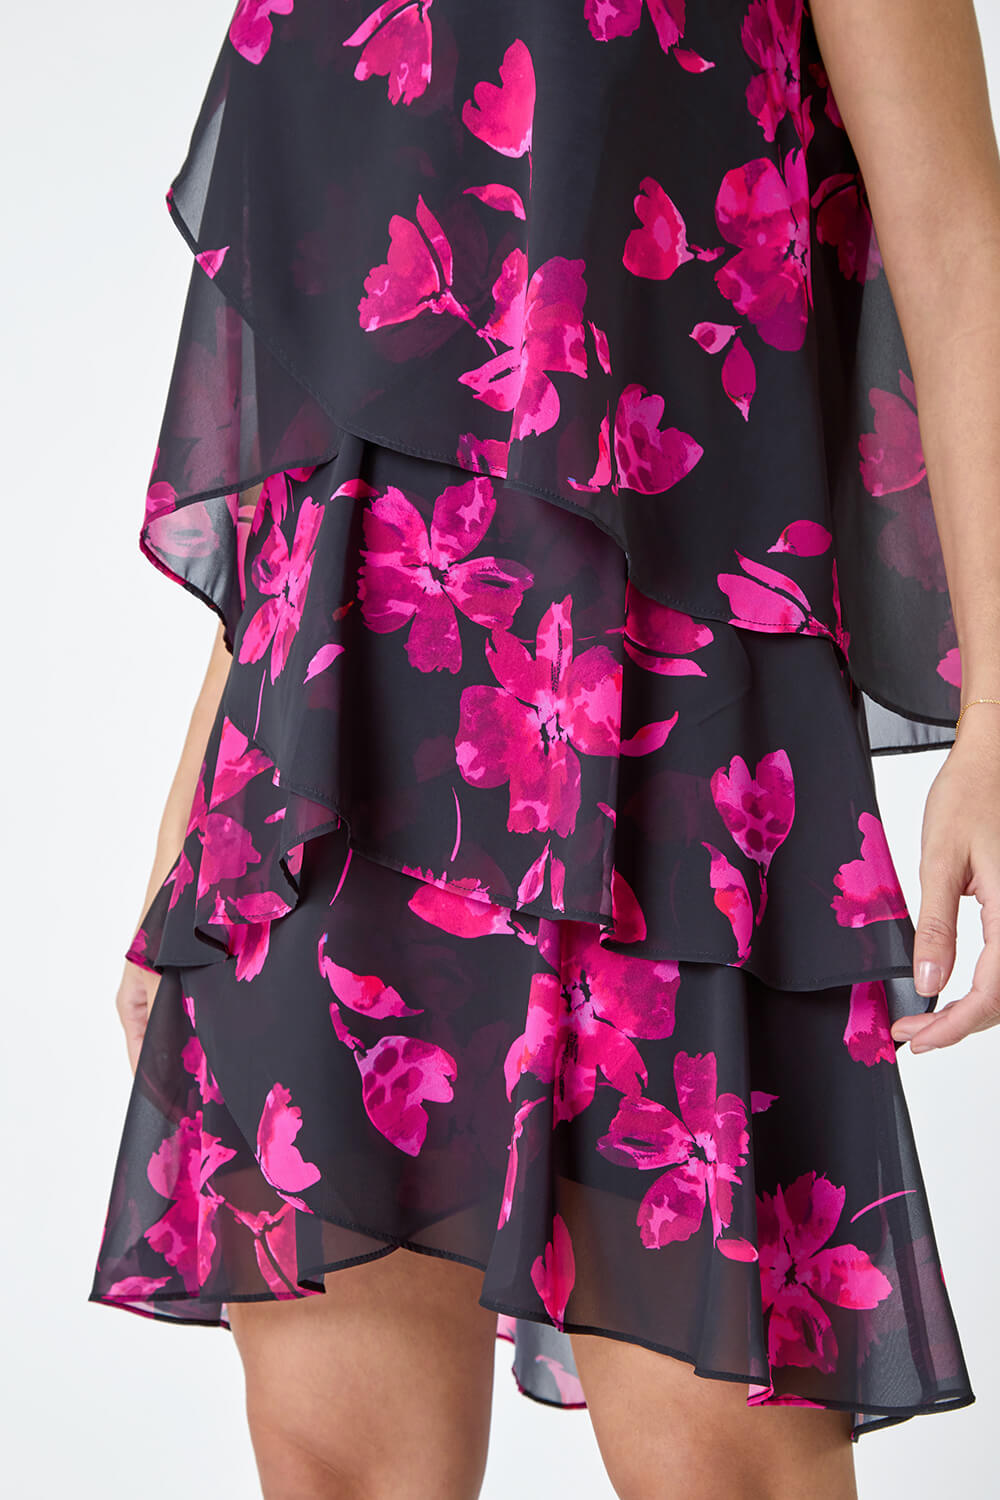 Black Floral Print Tiered Layer Dress, Image 5 of 5